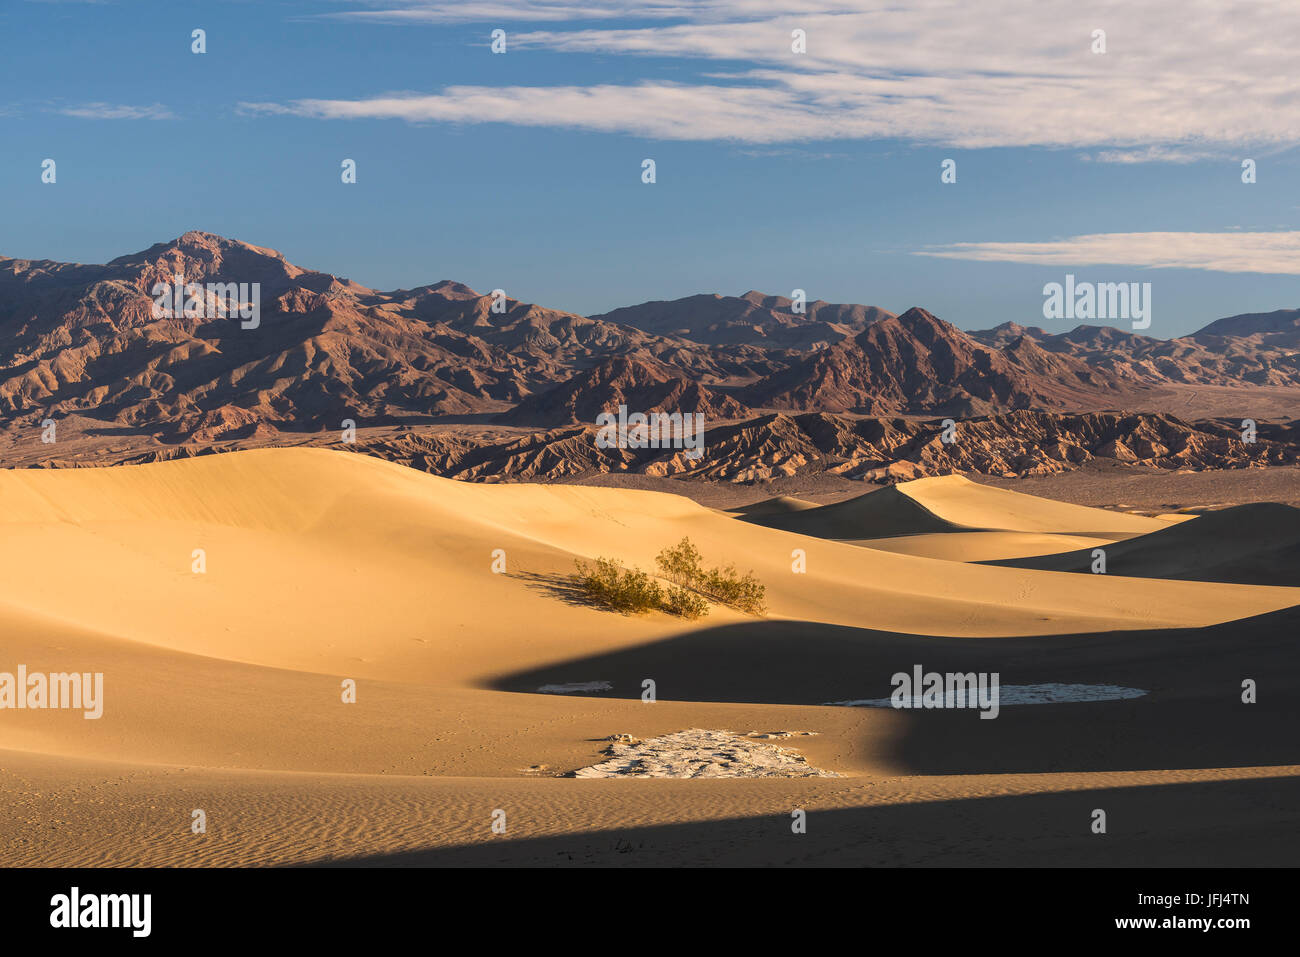 Mesquite Flat Sand Dunes, the USA, California, Death Valley Stock Photo